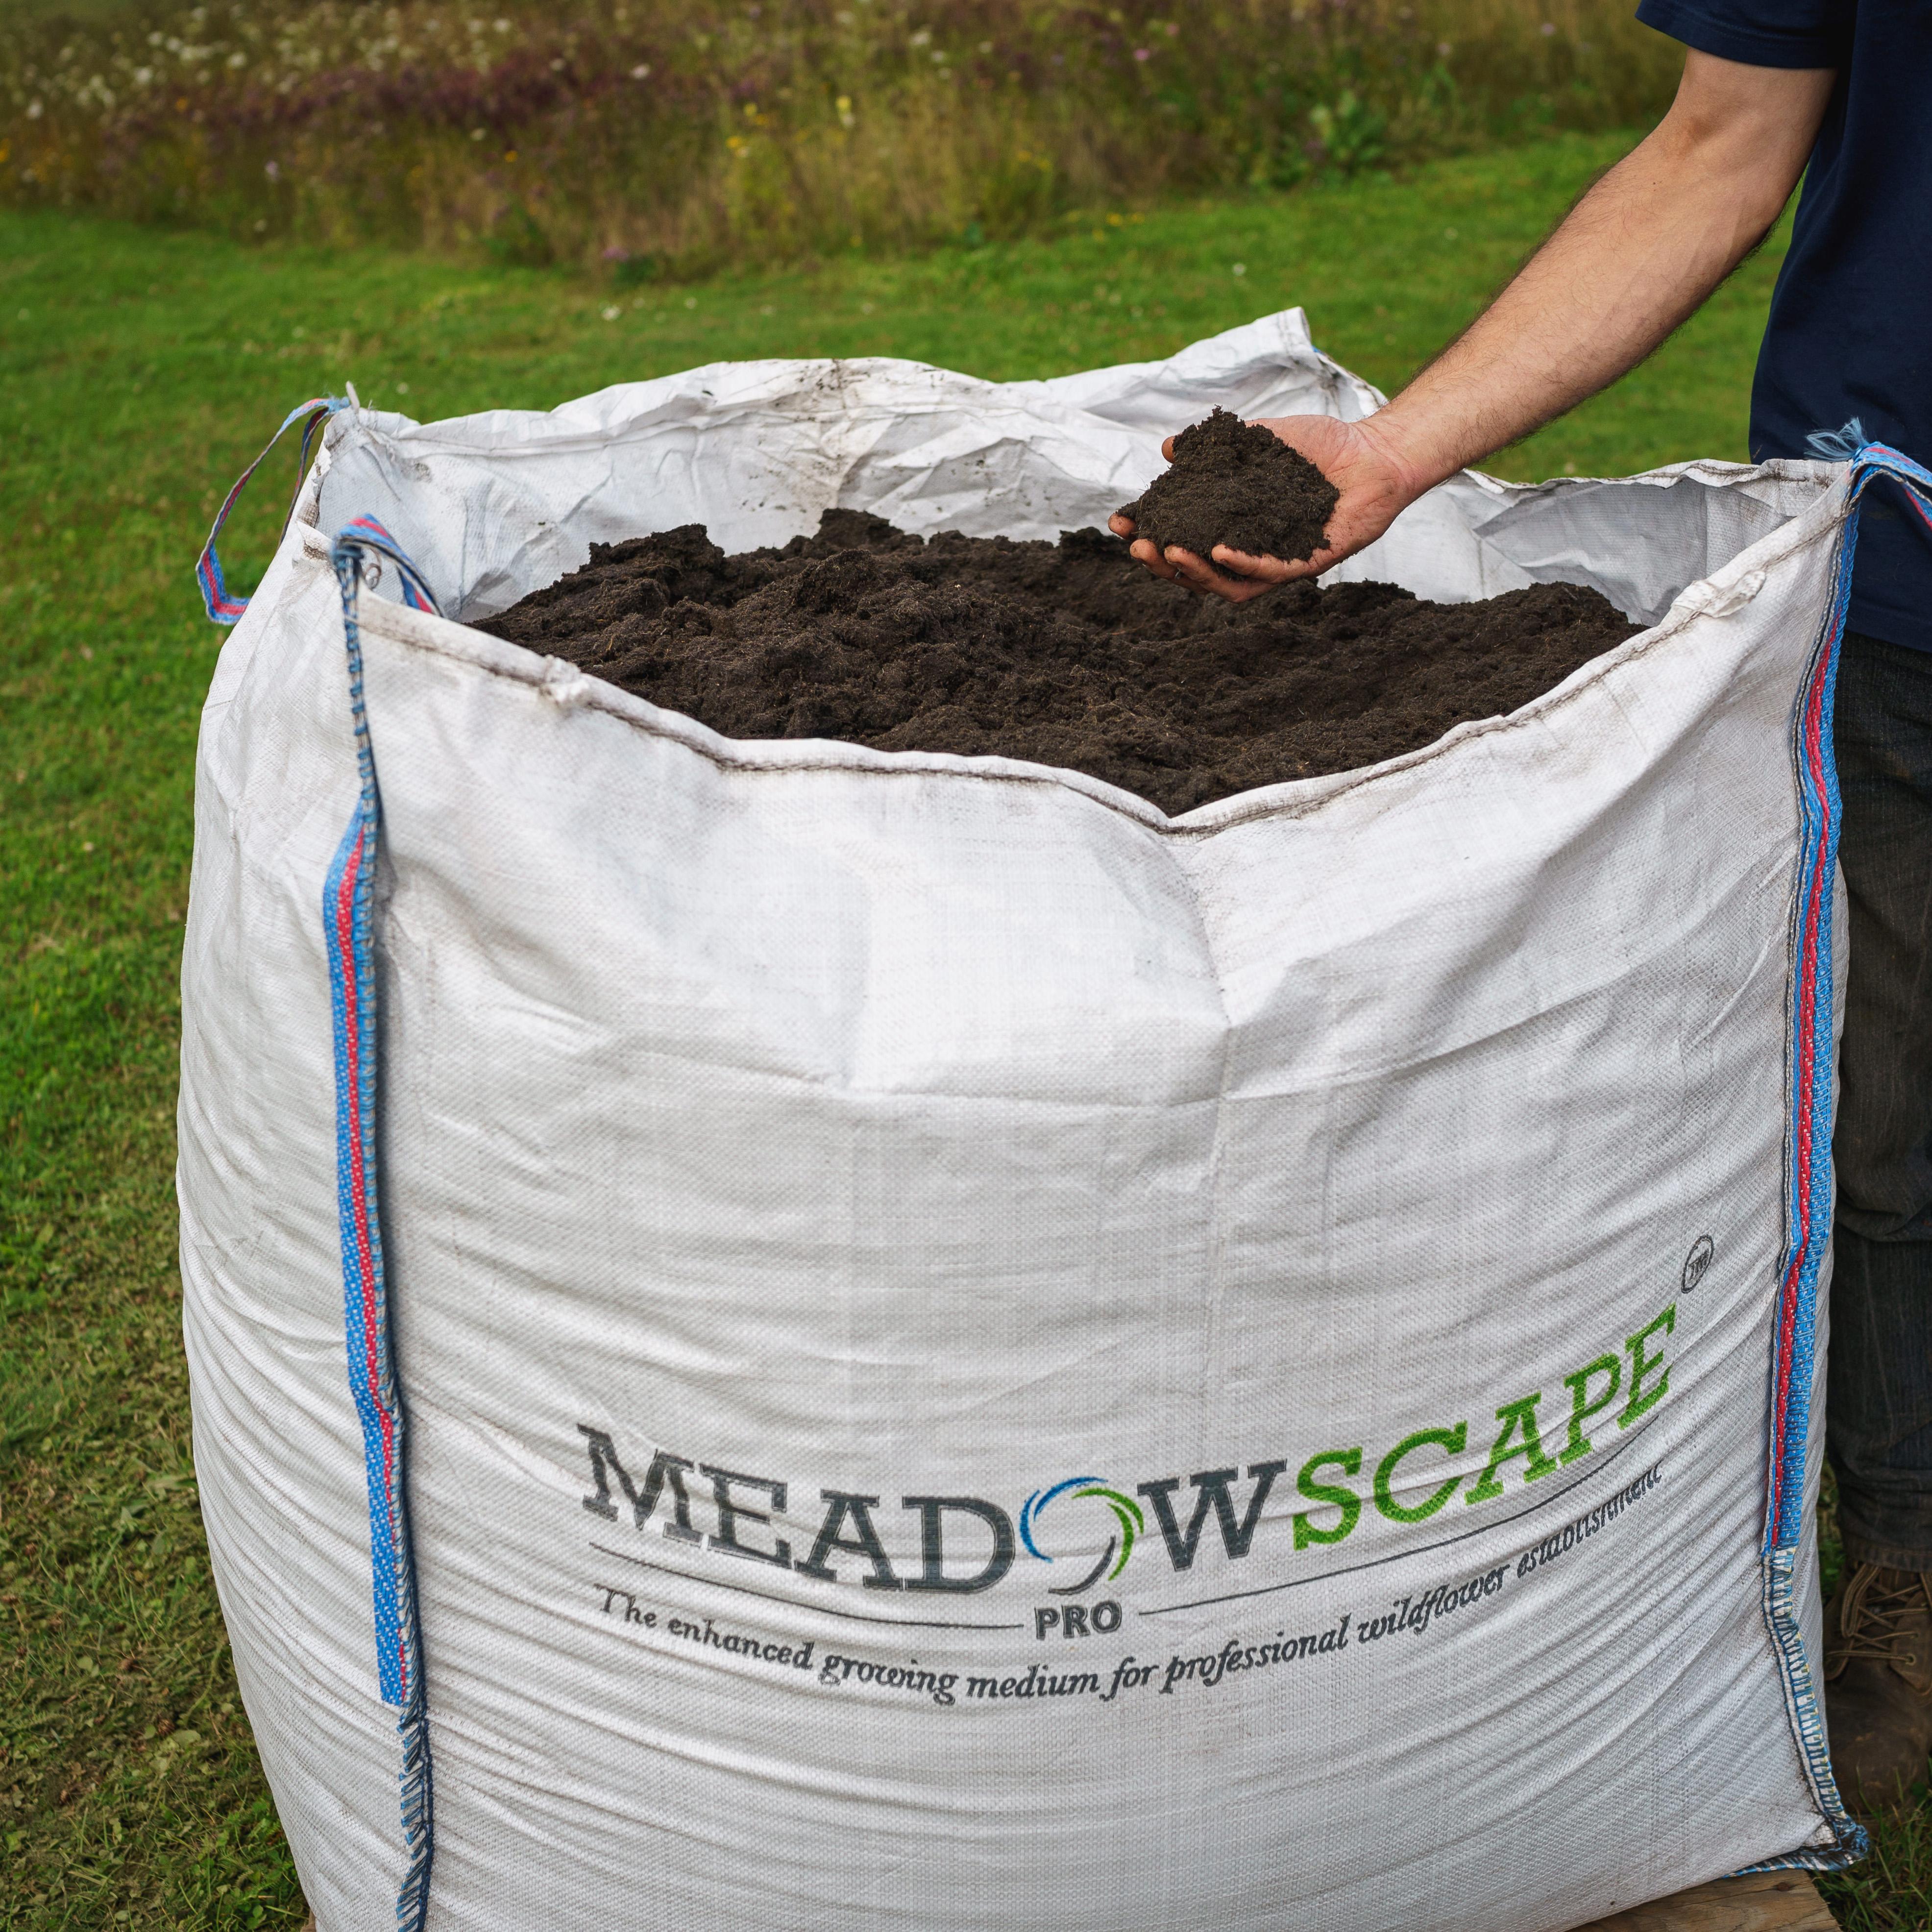 A dumpy bag of Meadowscape Pro with a hand holding some of the product